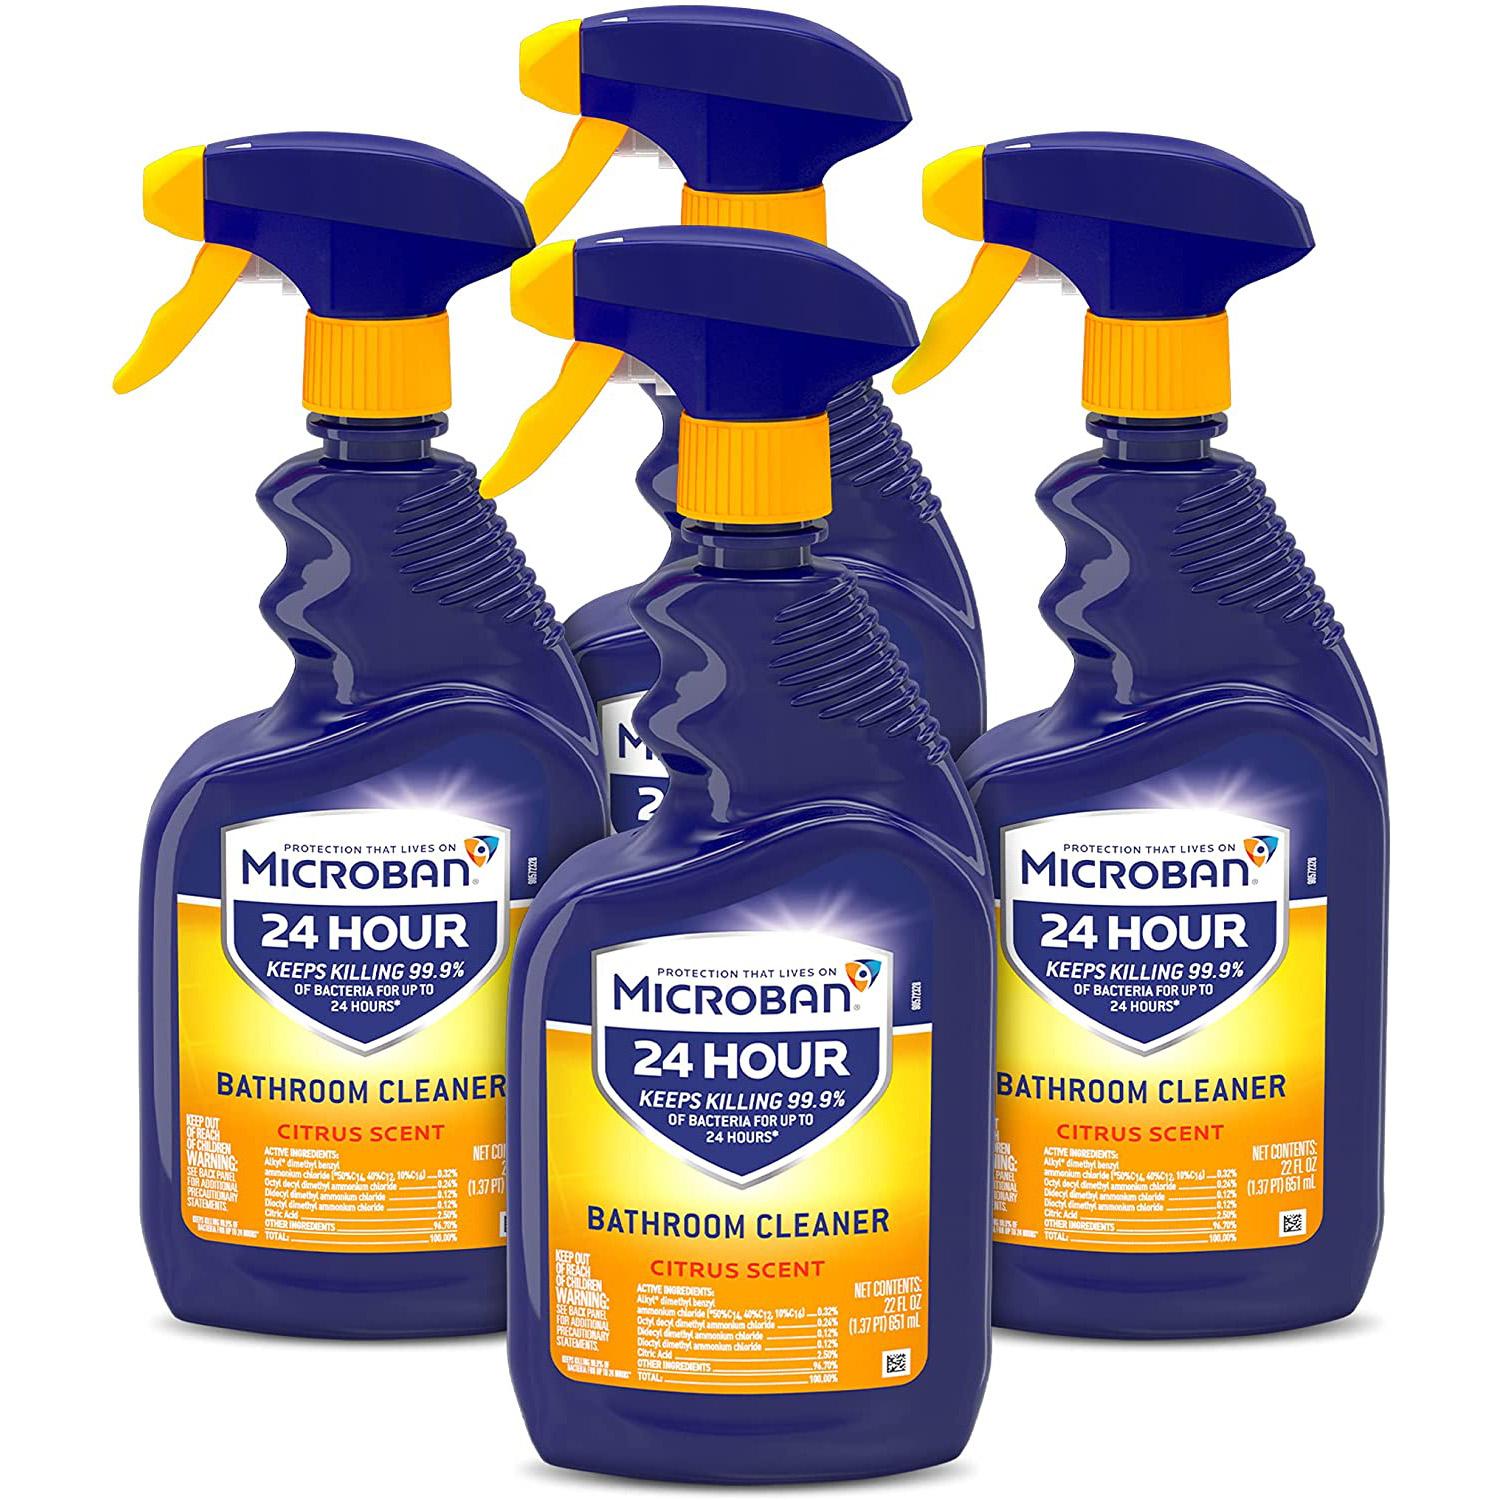 Microban Citrus Scent Bathroom Cleaner for $8.75 Shipped